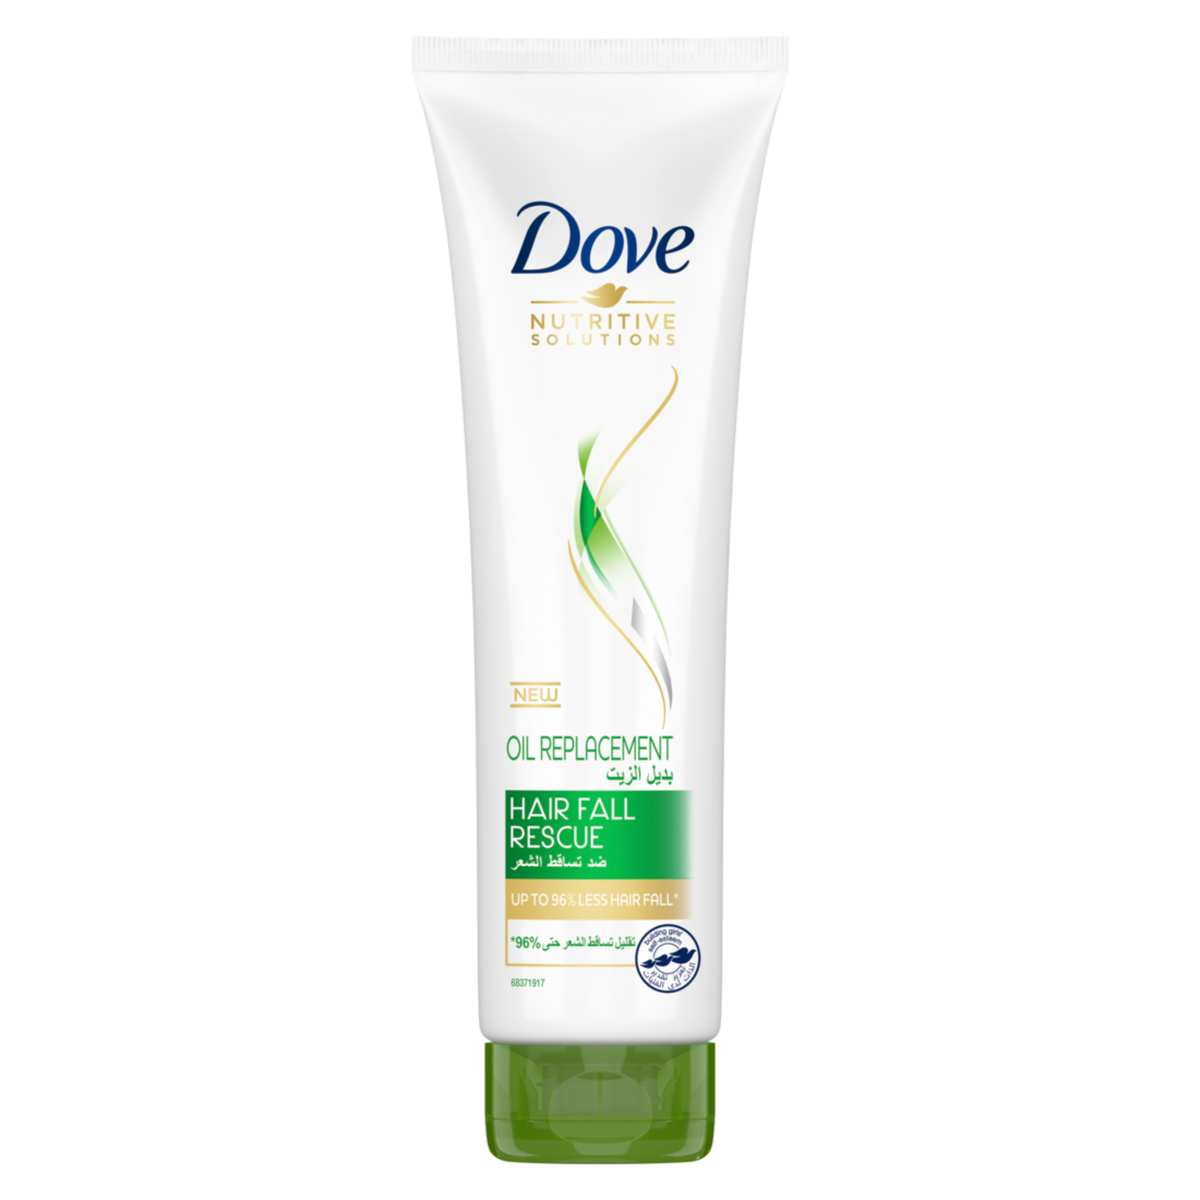 Dove Hair Fall Rescue Oil Replacement 300 ml